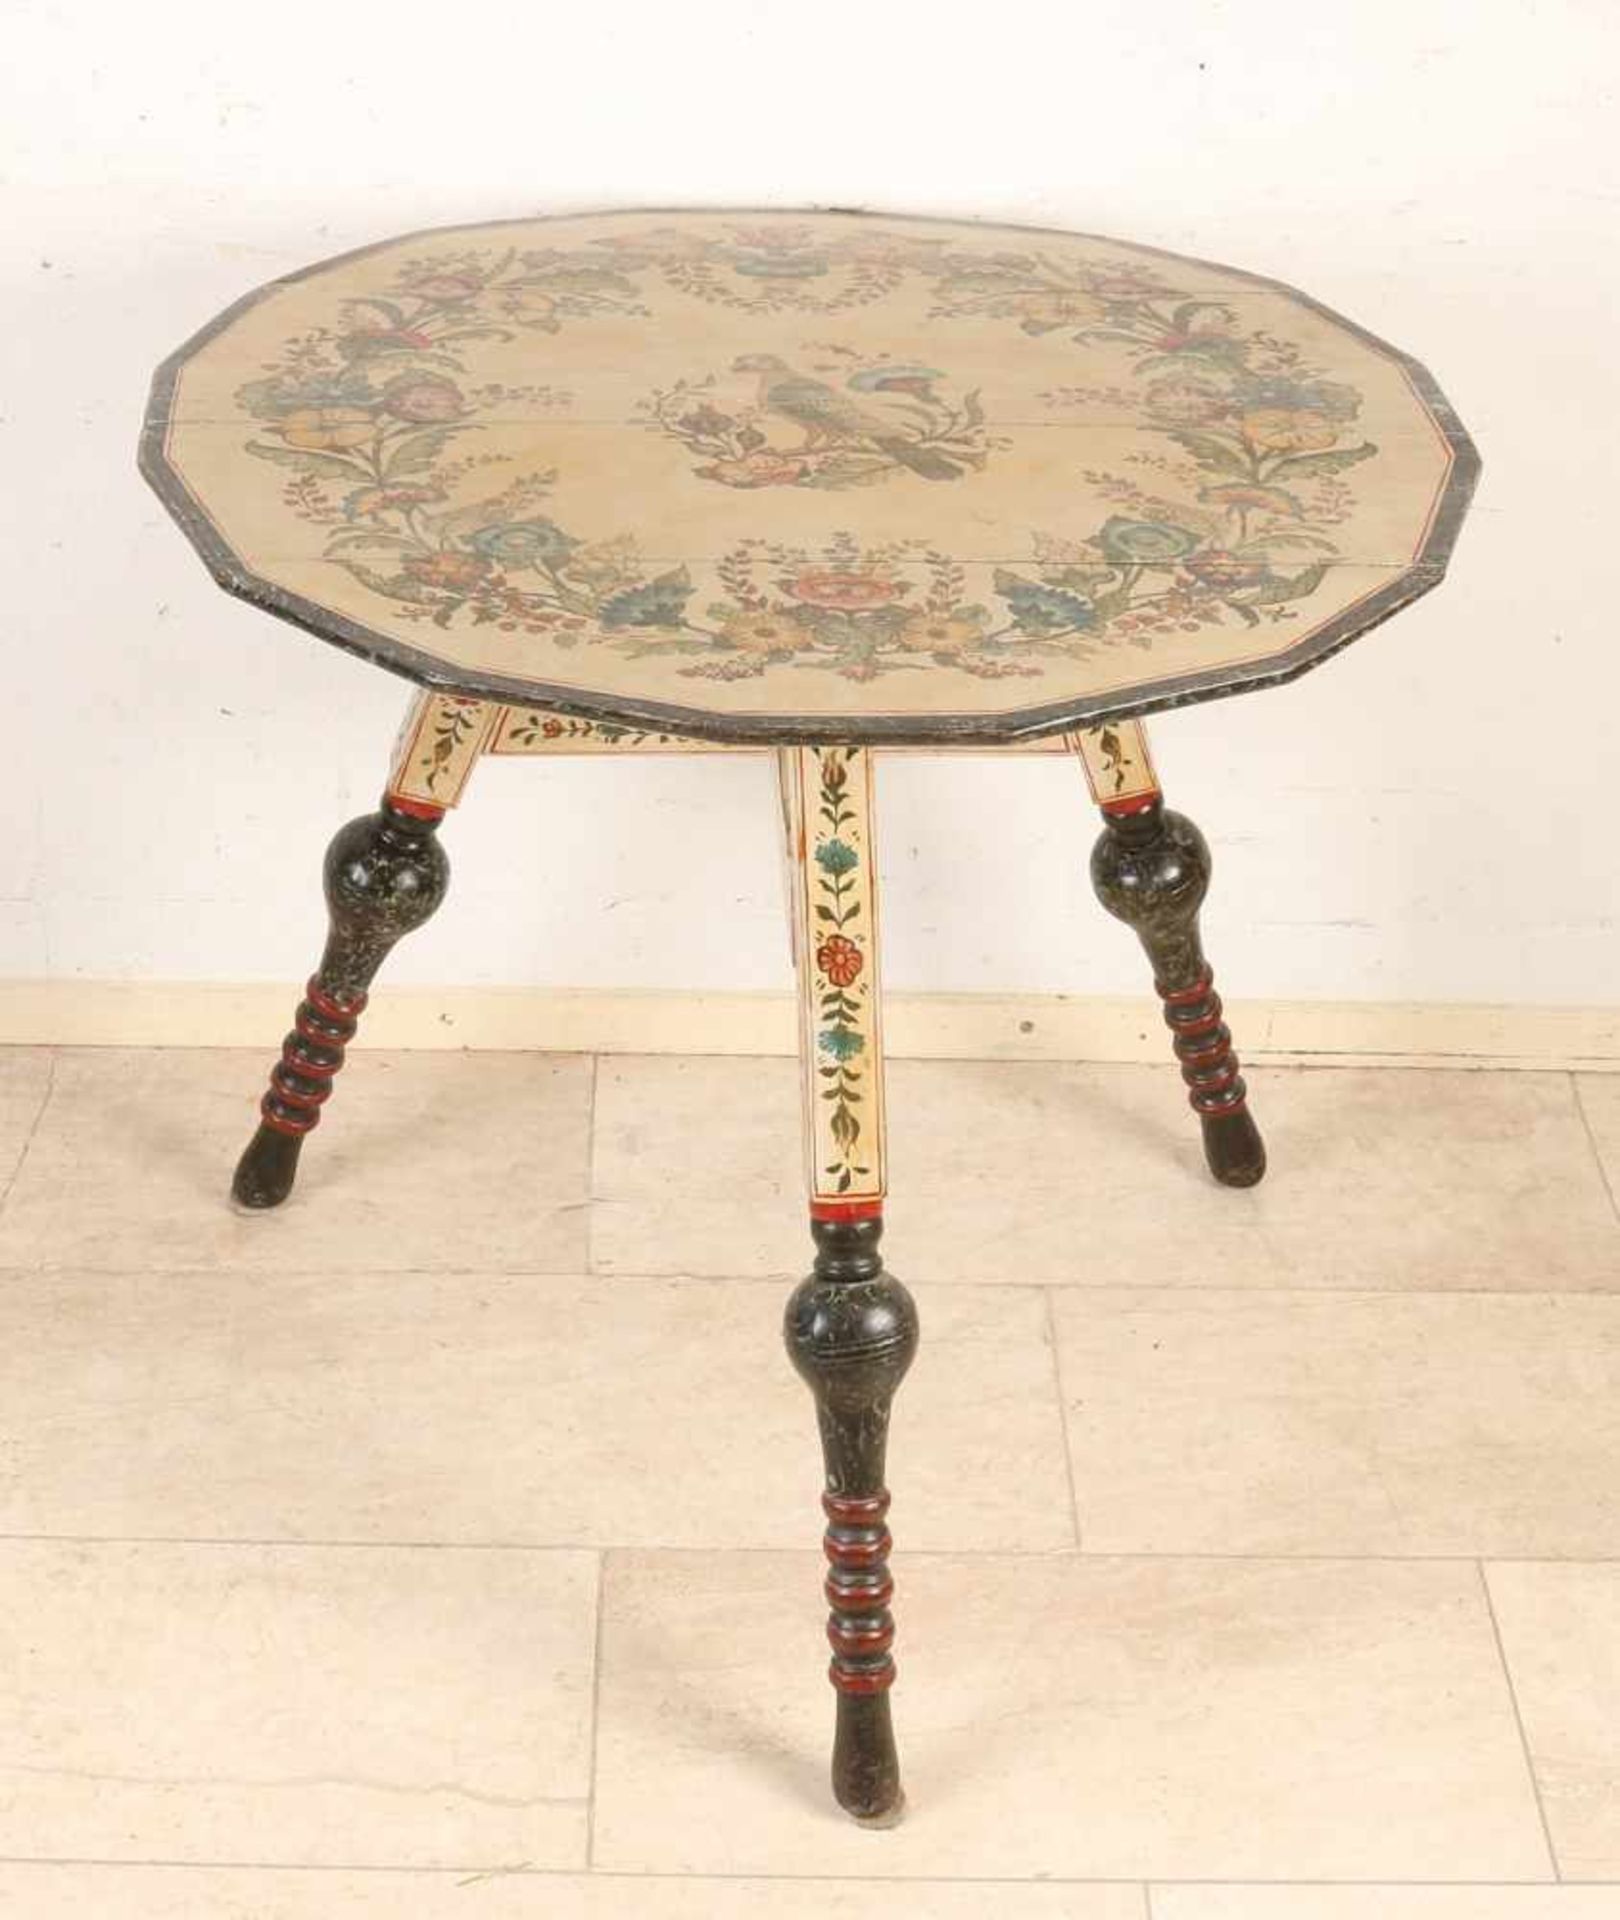 19th Century handpainted Hindeloopen table with leaf floral / parrot decor. Bottom sheet bird /